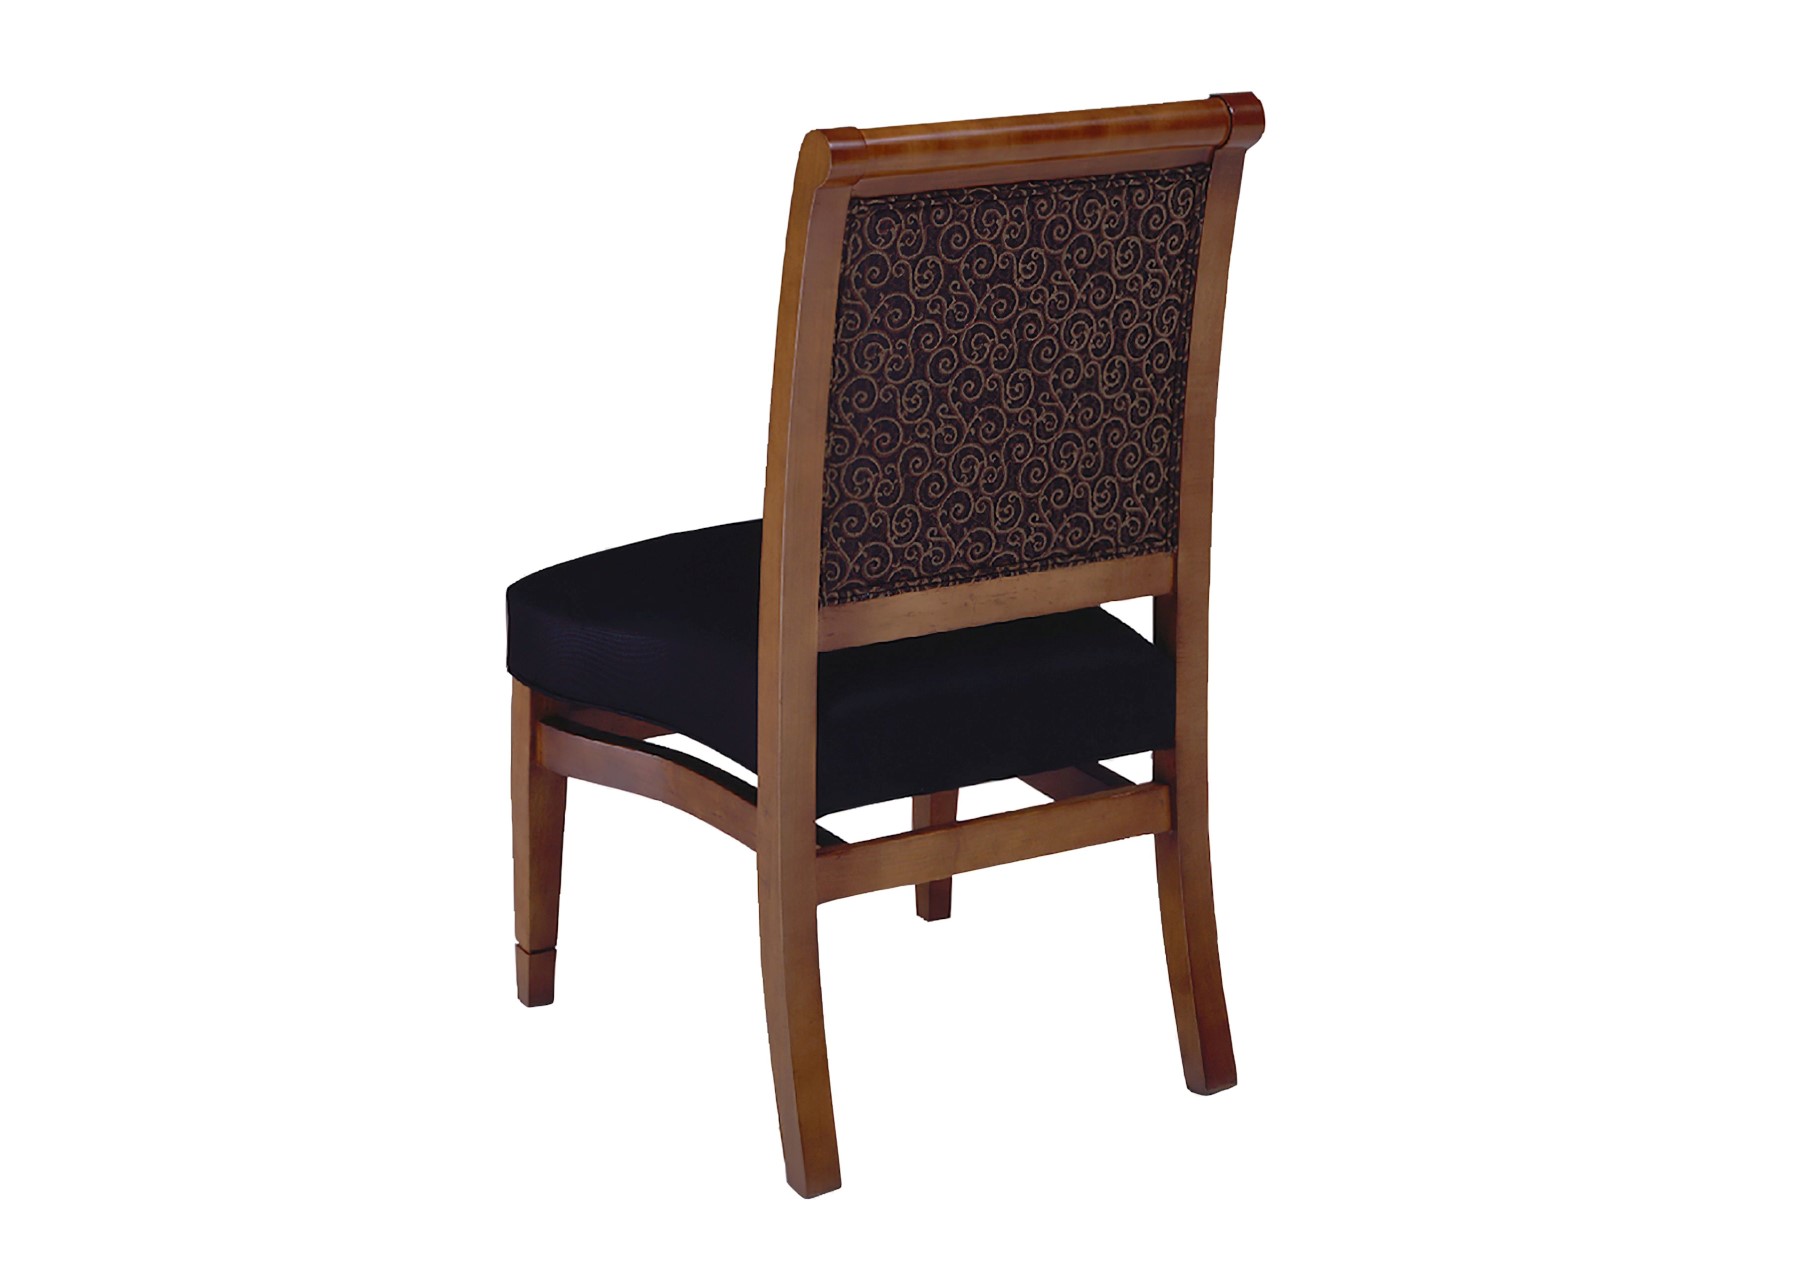  BEDFORD SIDE CHAIR